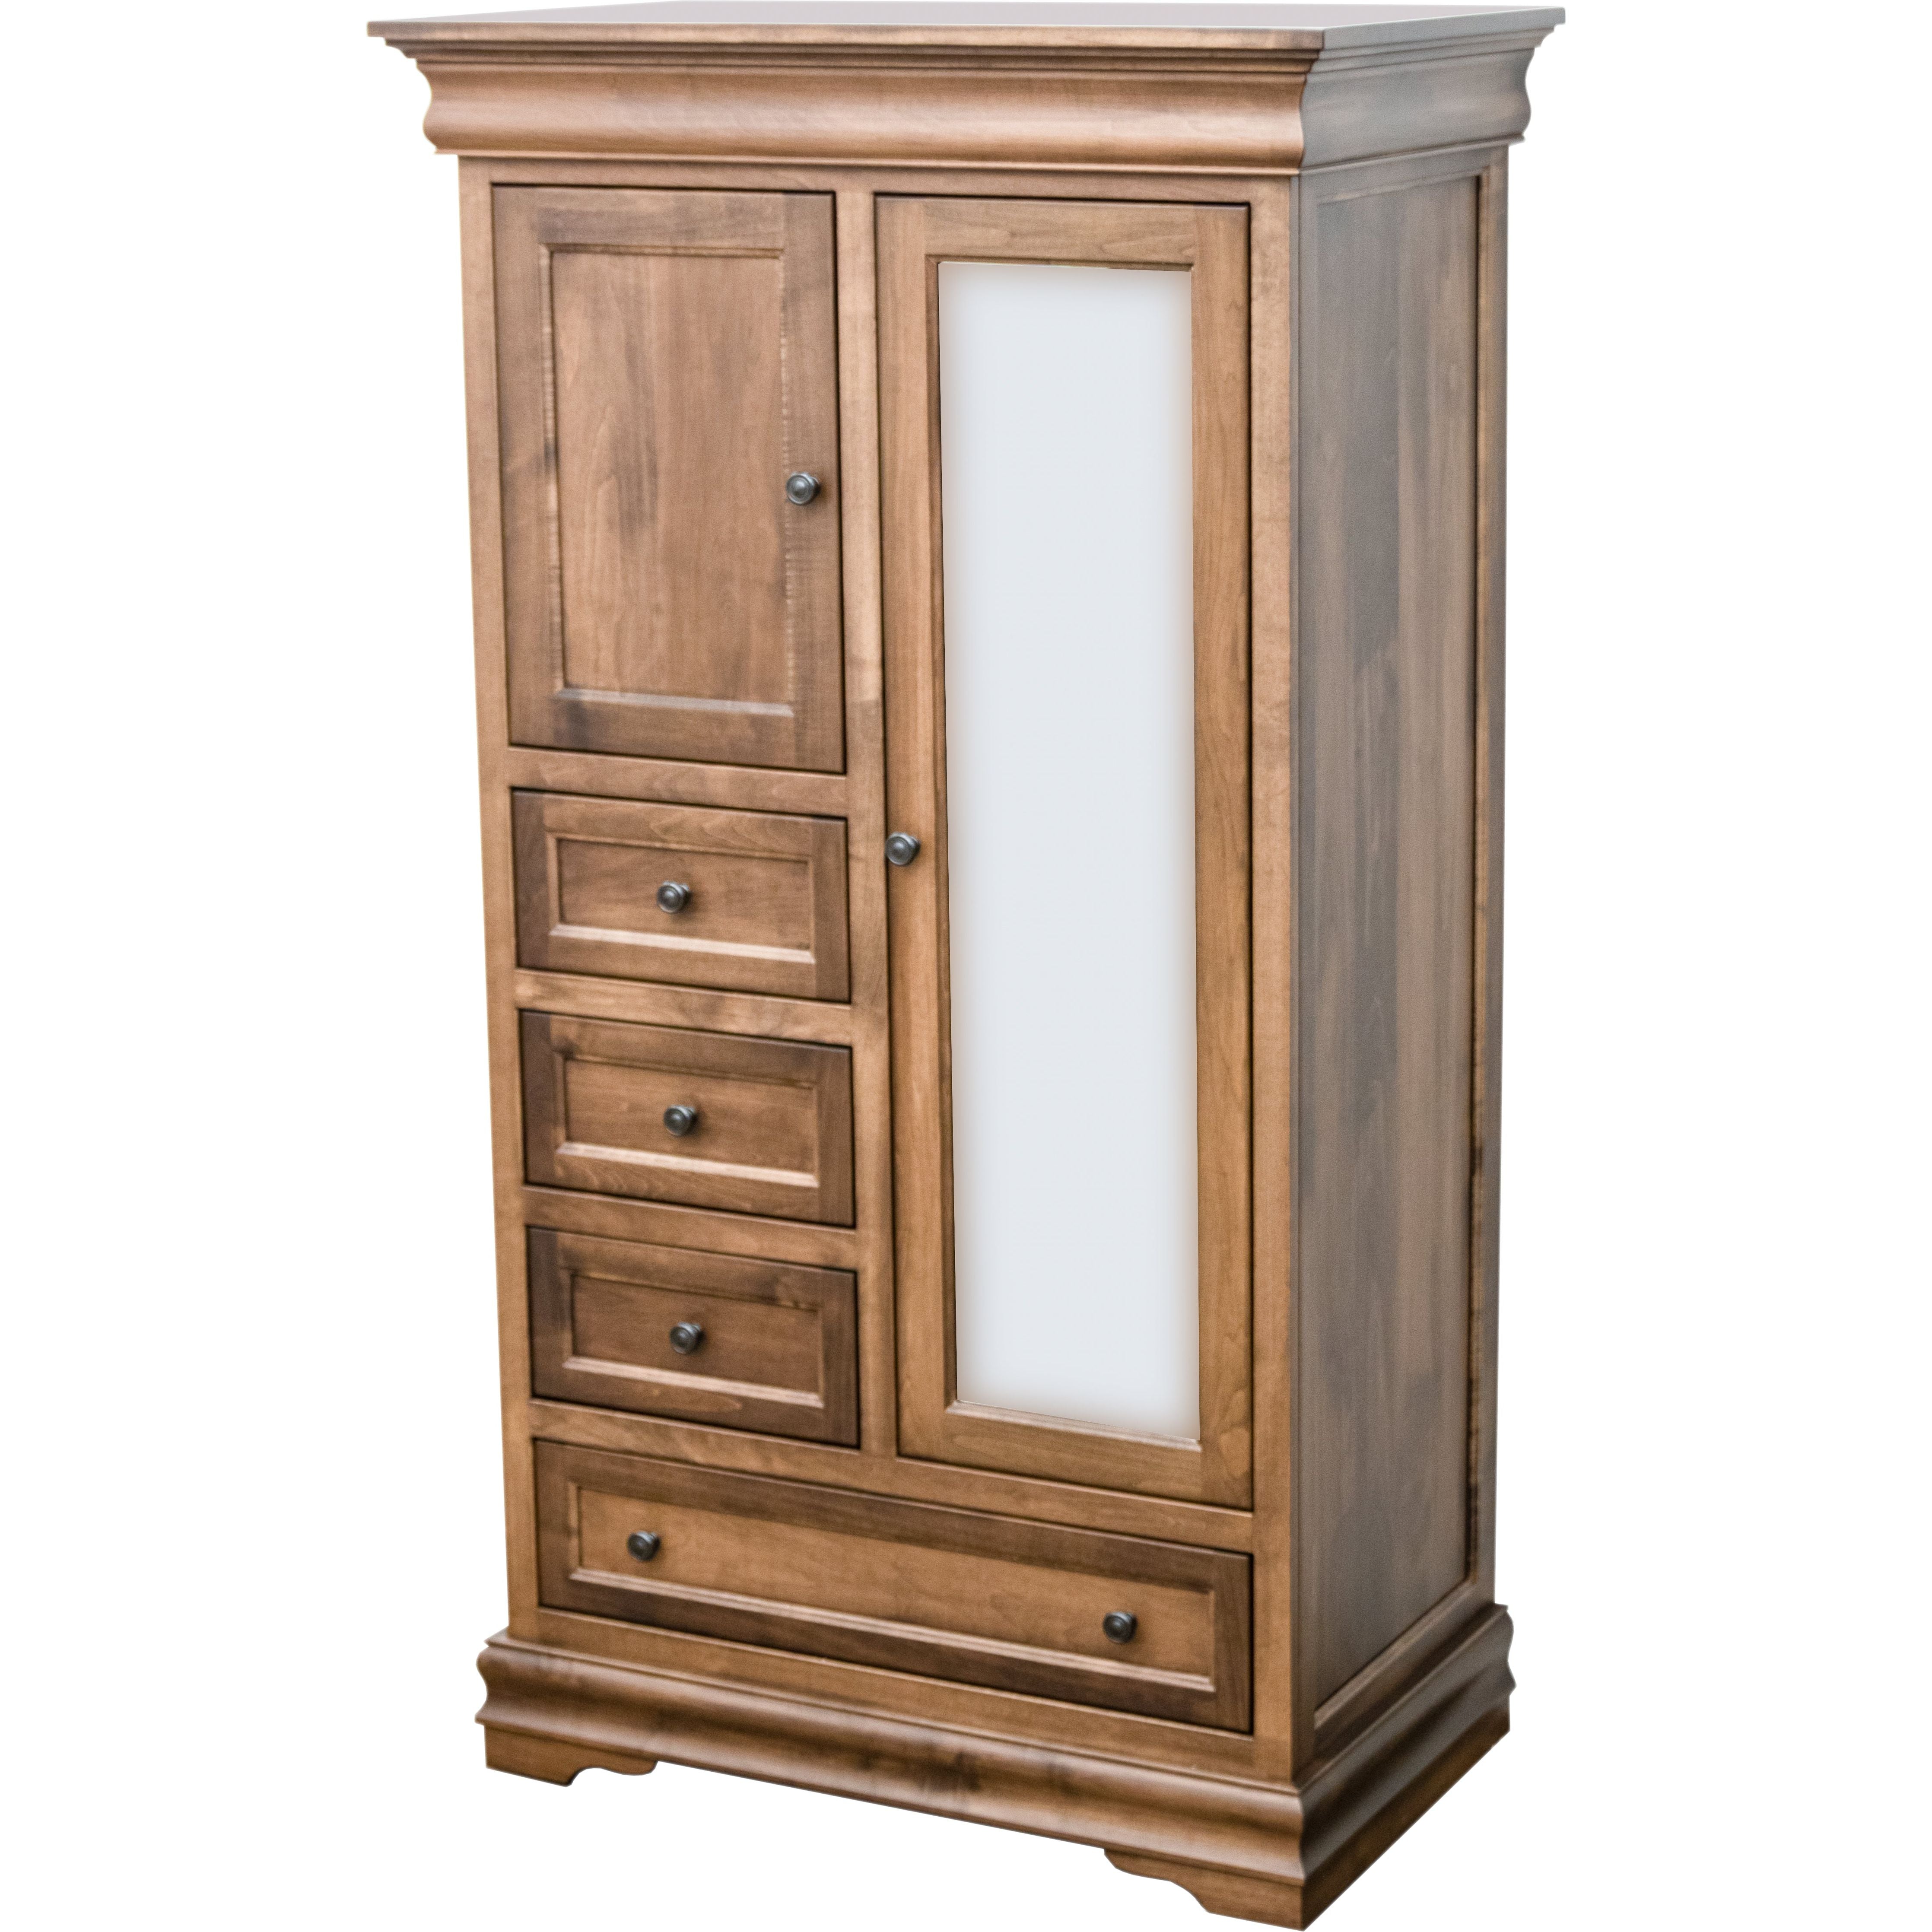 Wood Armoire Wardrobe from DutchCrafters Amish Furniture